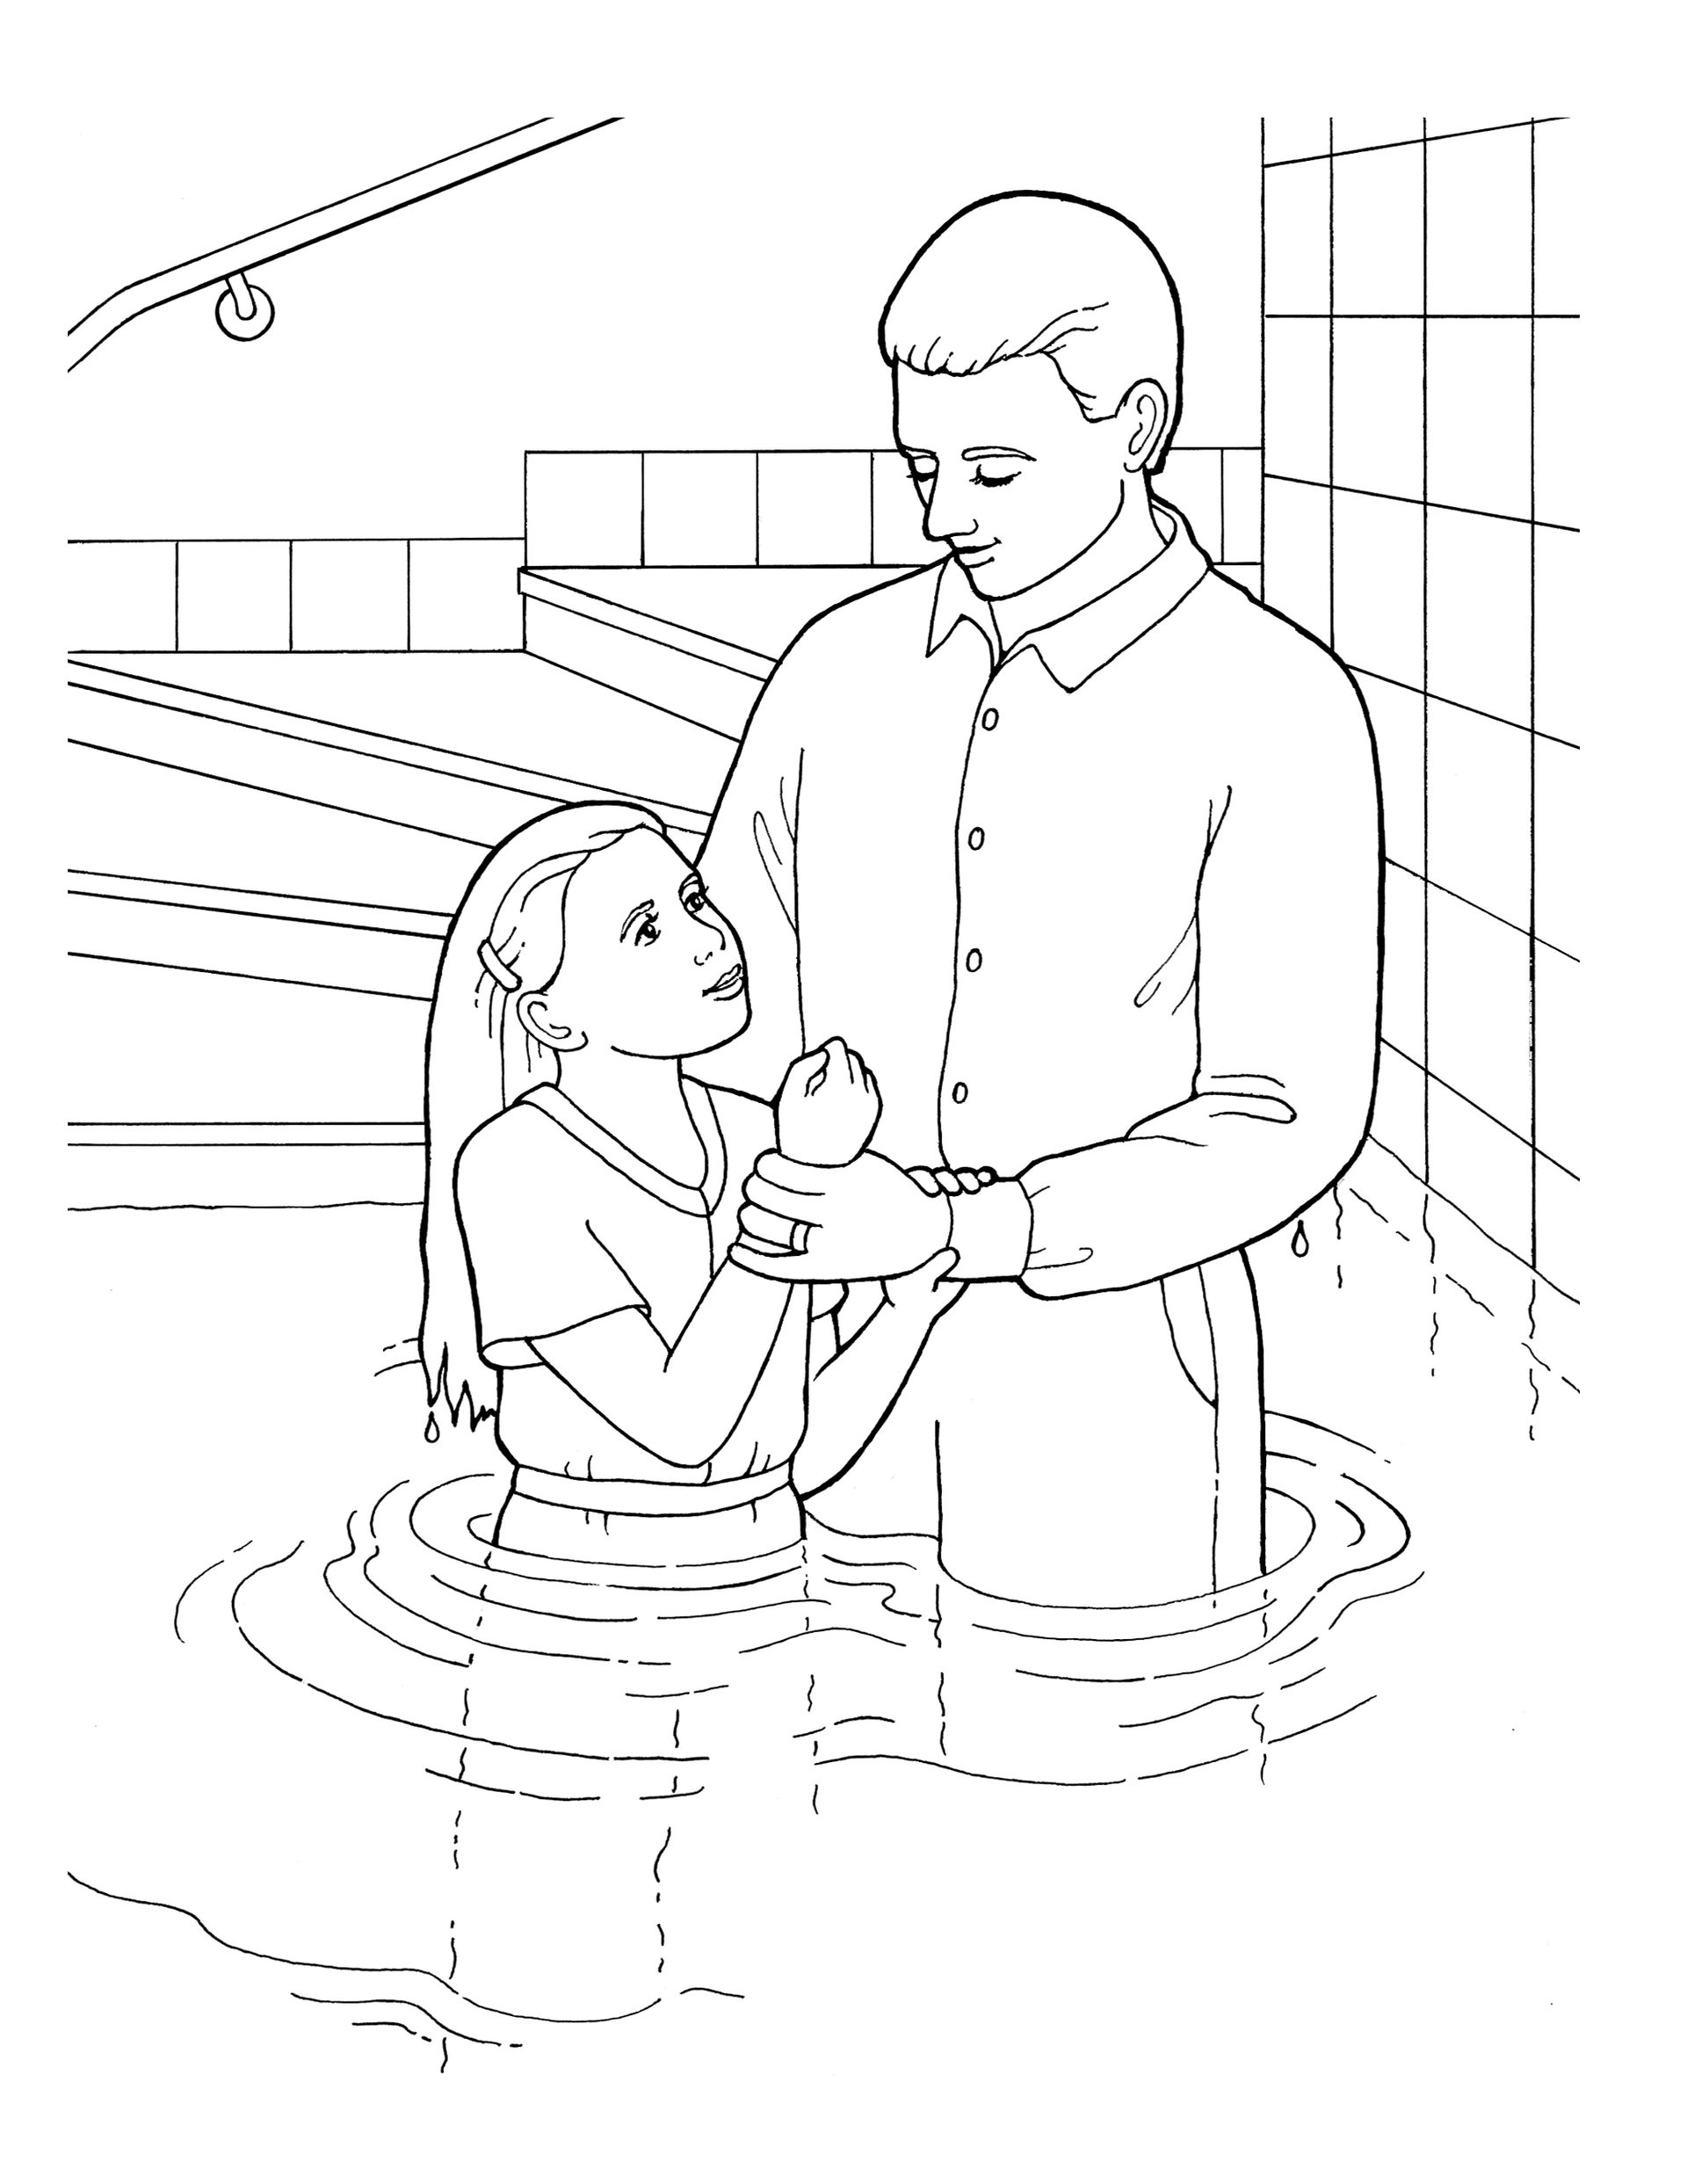 An illustration of a young girl being baptized.